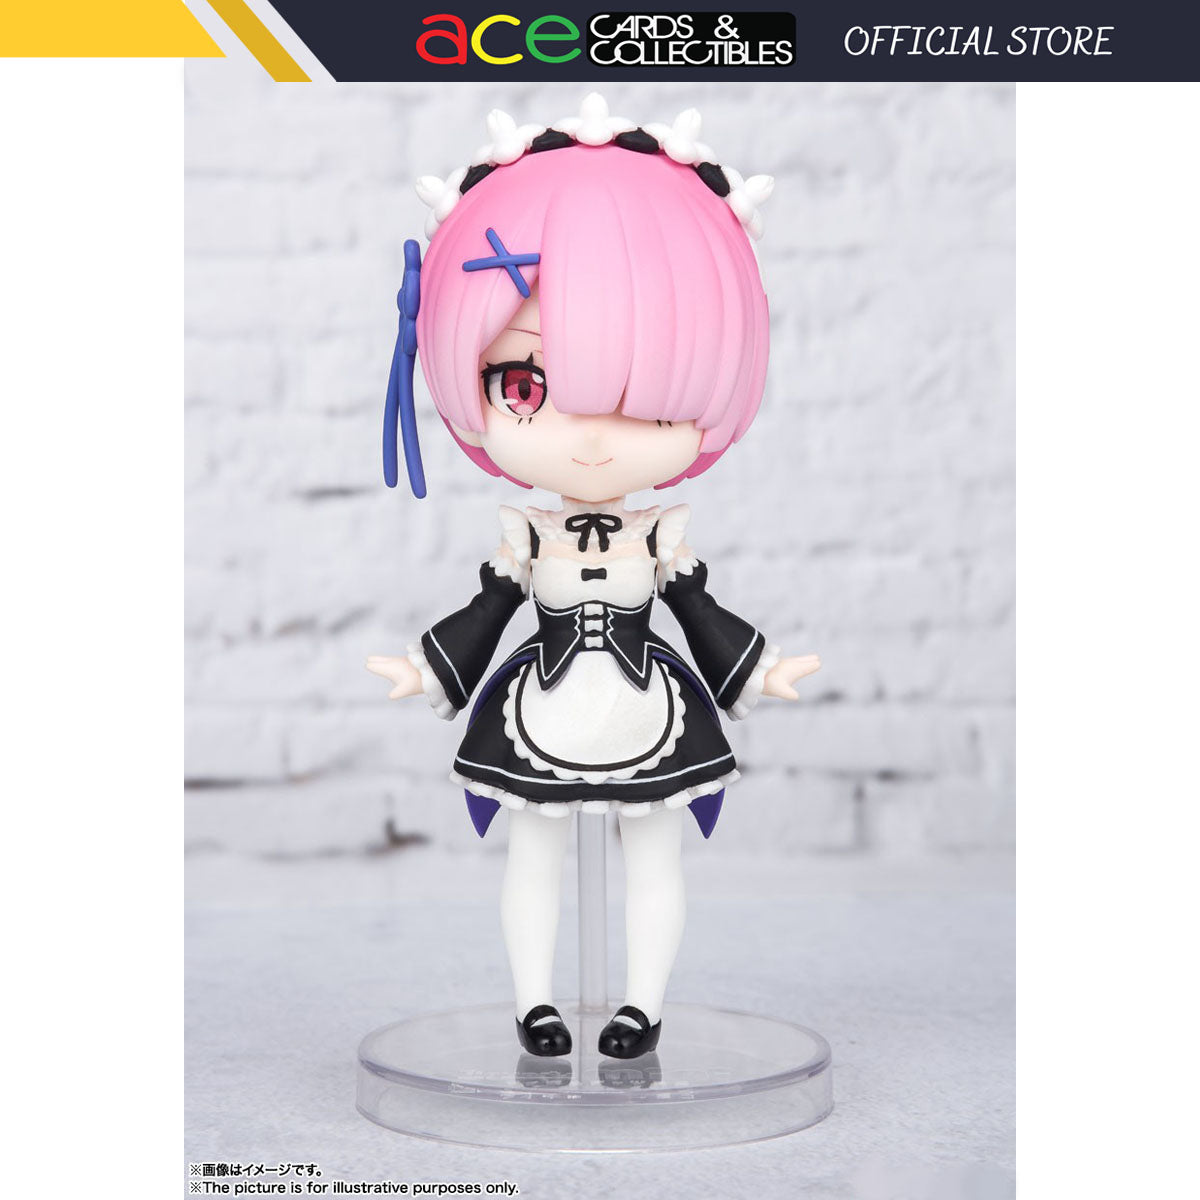 Re: Zero -Starting Life in Another World- Figuarts Mini "Ram"-Bandai-Ace Cards & Collectibles